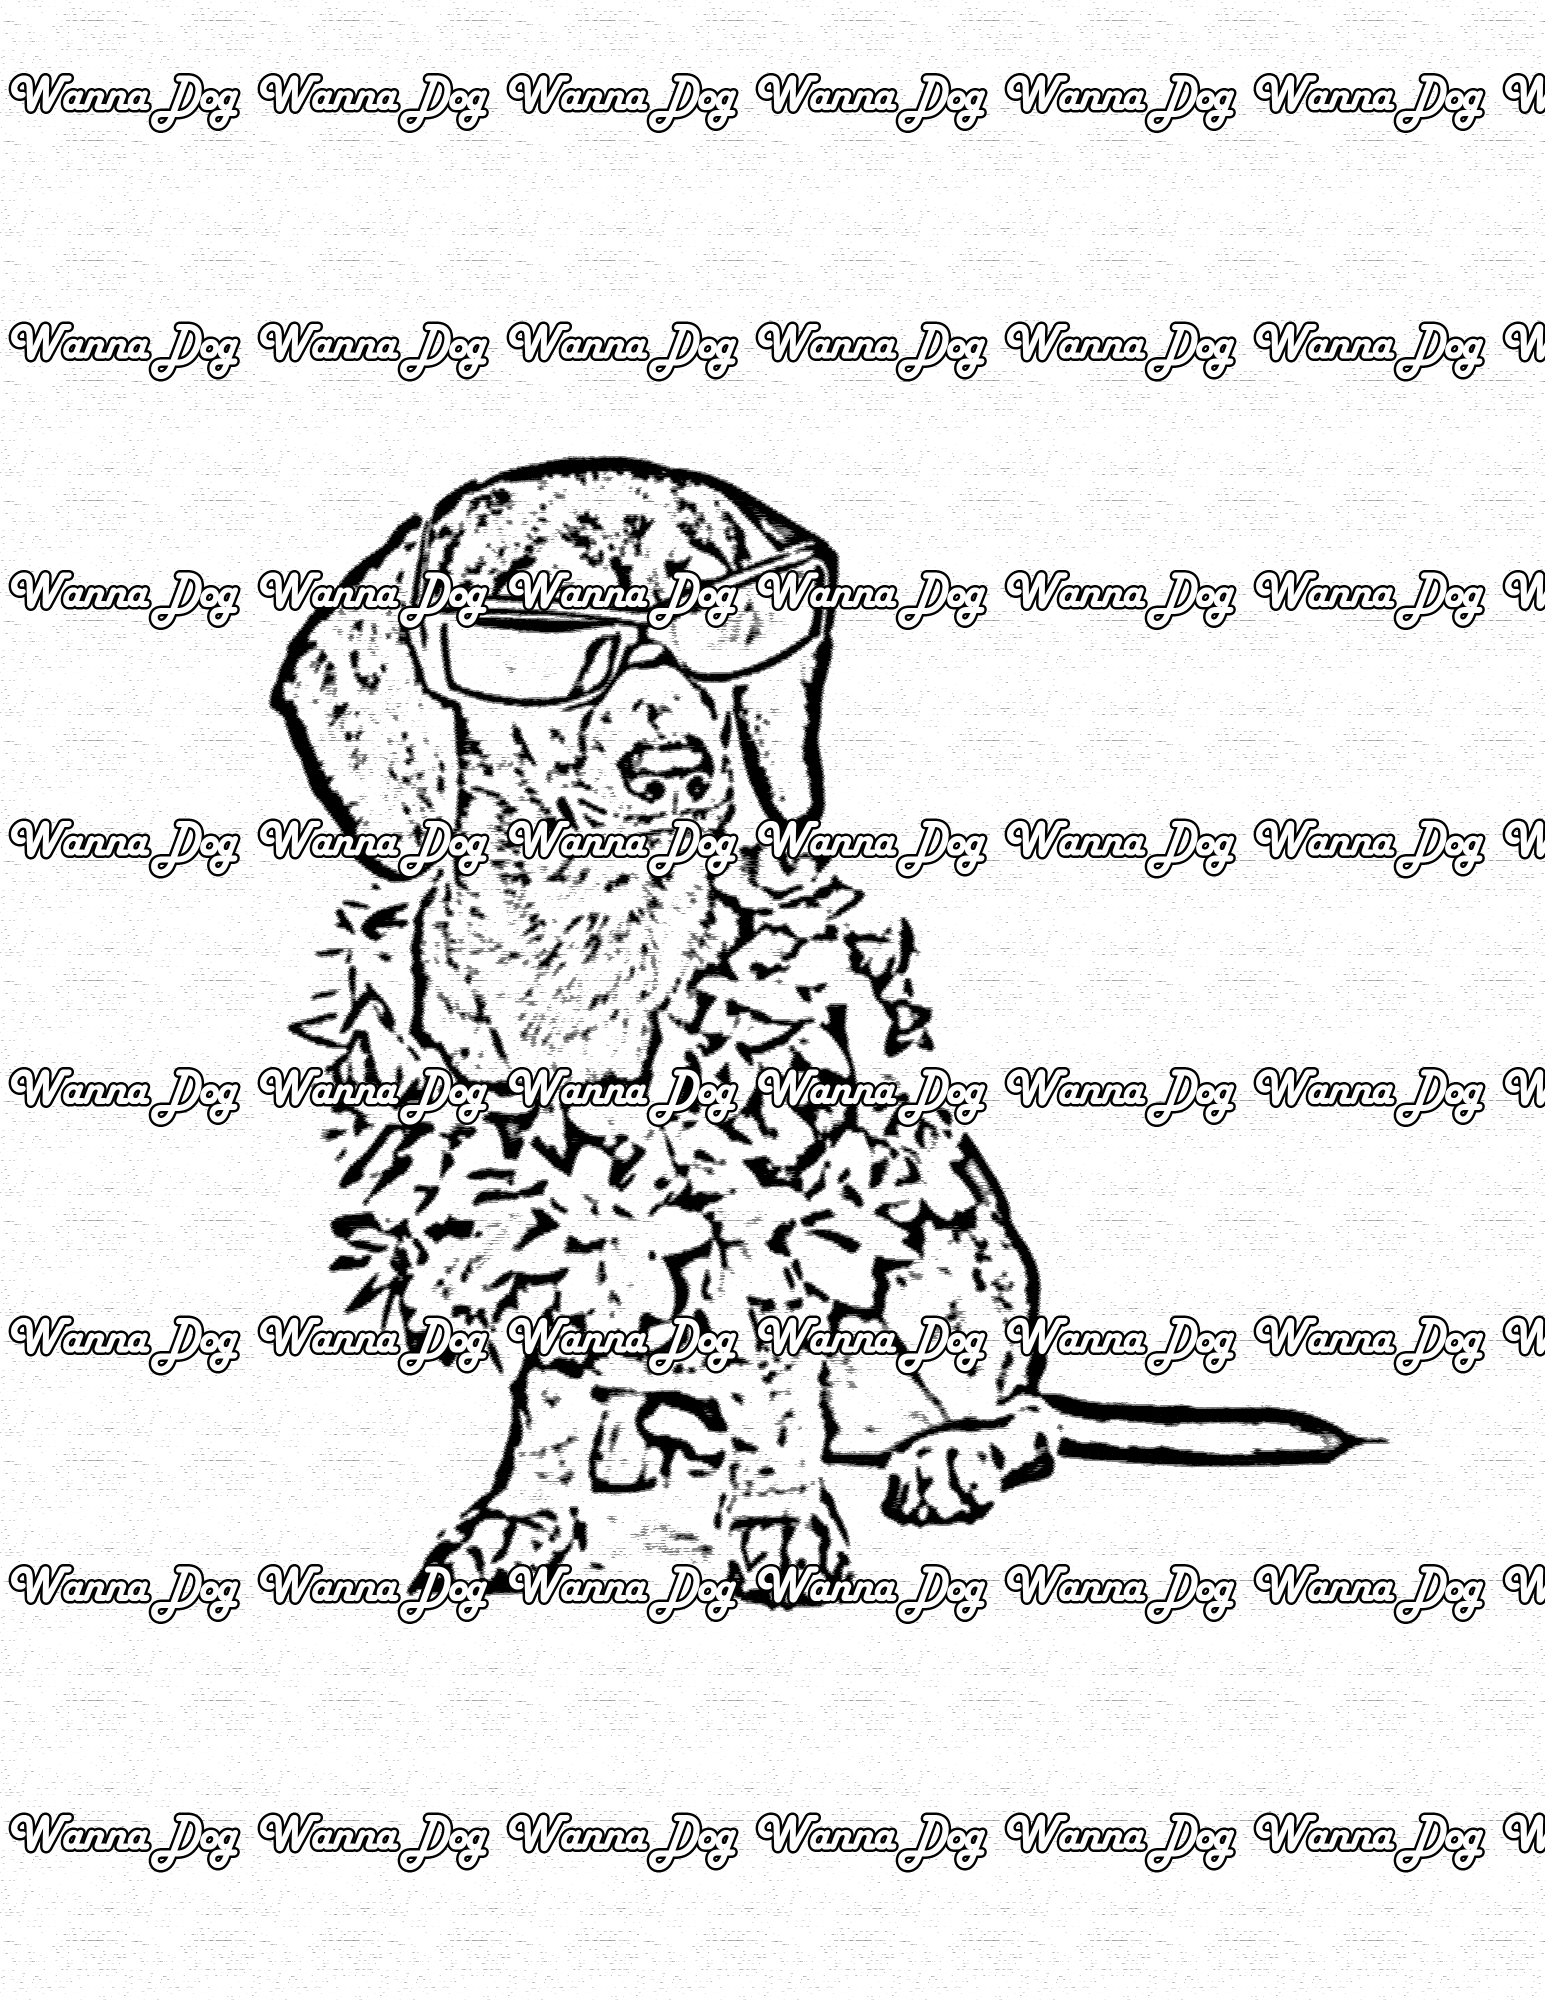 Dachshund Coloring Page of a Dachshund with sunglasses